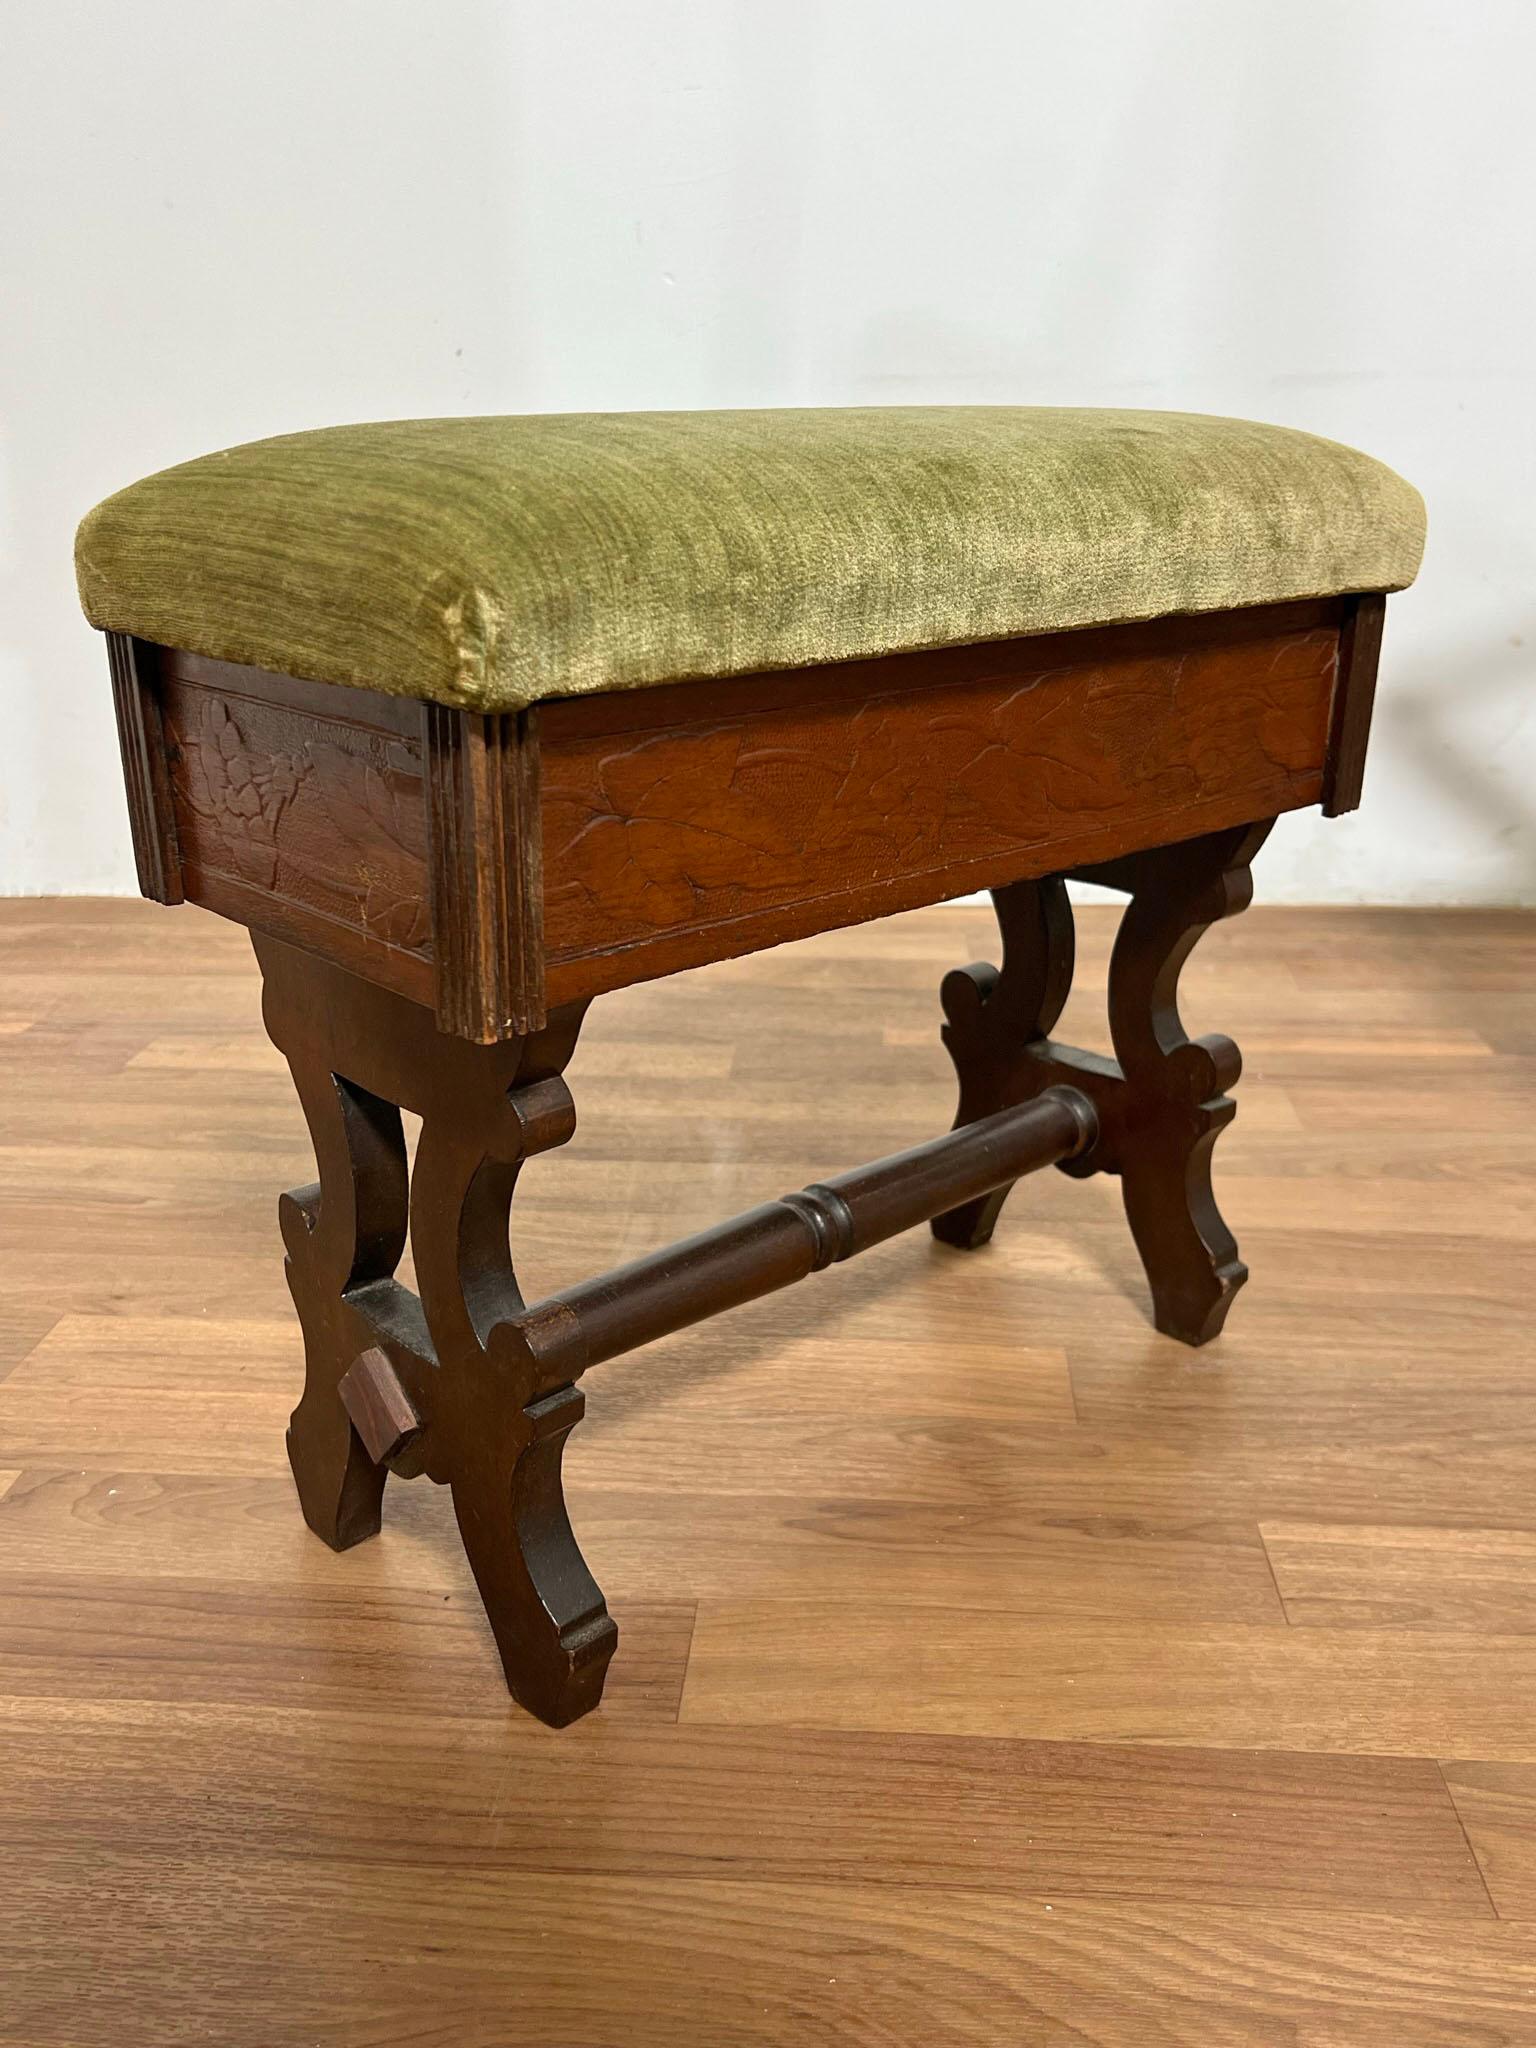 Victorian Era Campaign Chair with Lidded Ottoman, circa 1890s For Sale 8